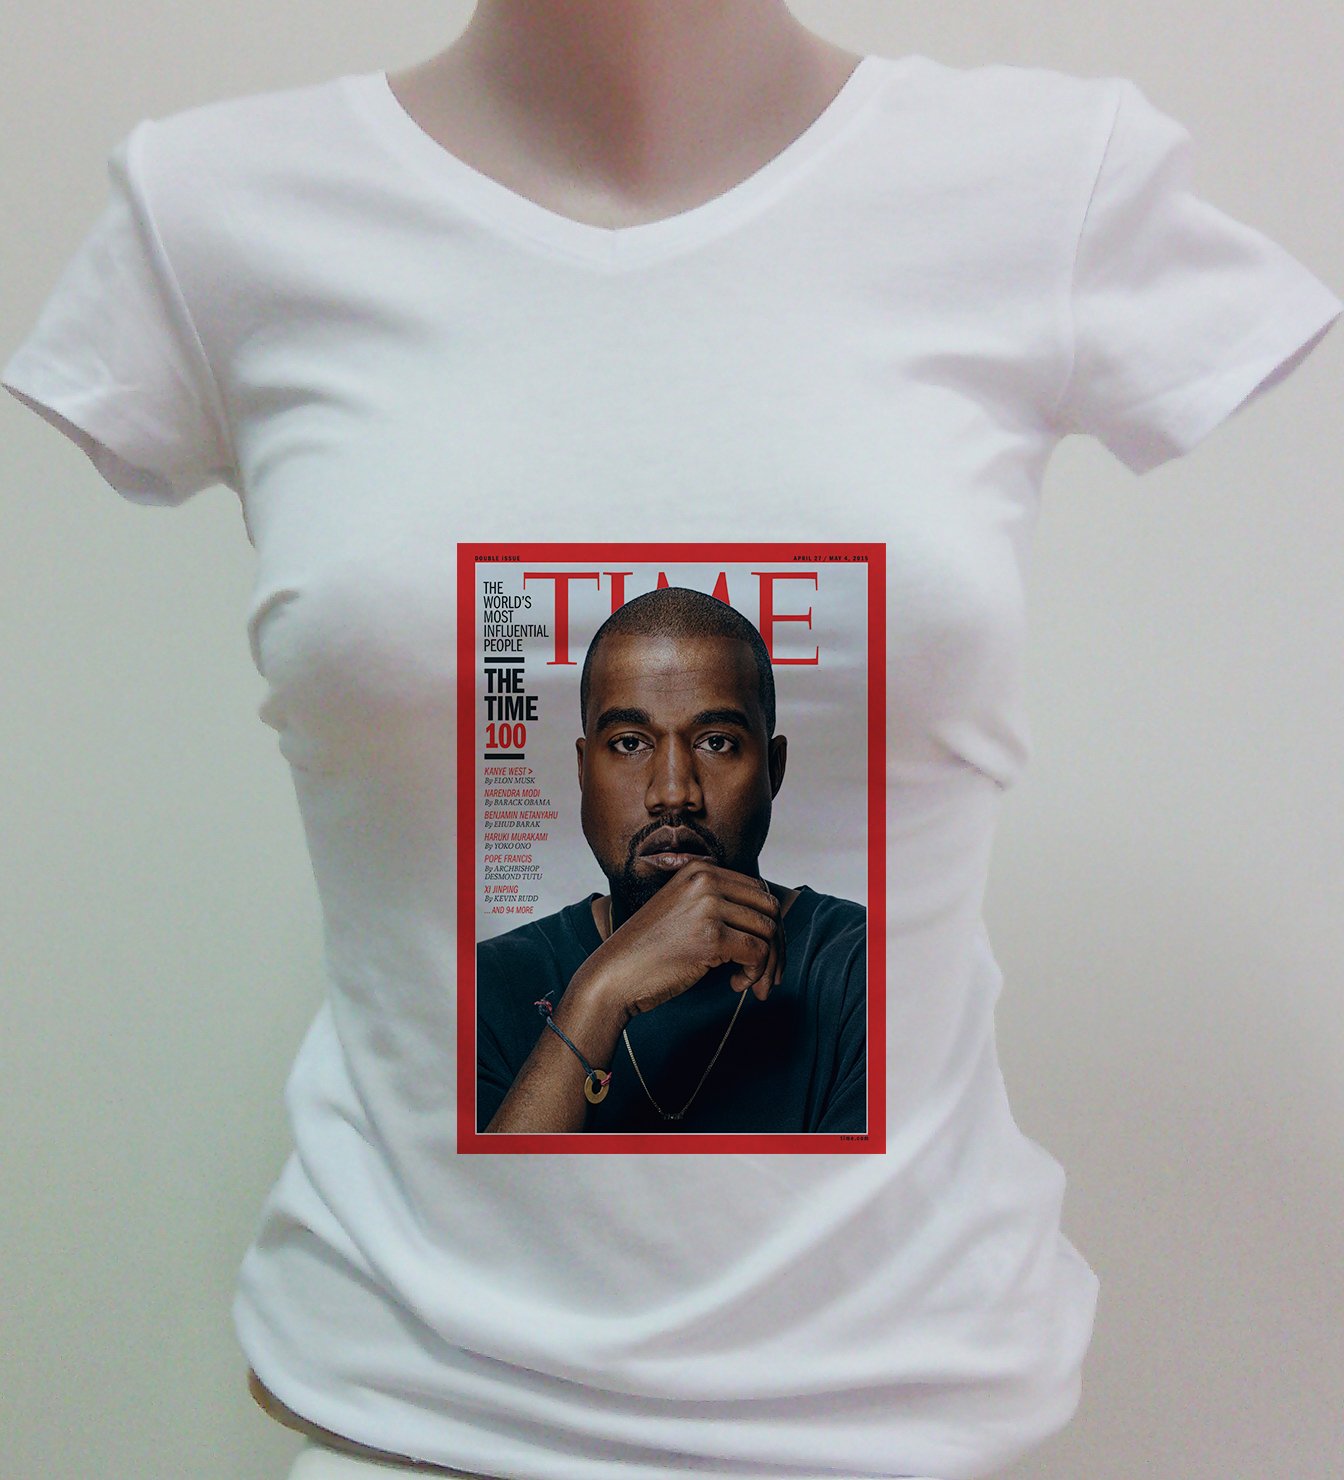 Kanye West Woman T-Shirt (Available in XS/S/M/L/XL)